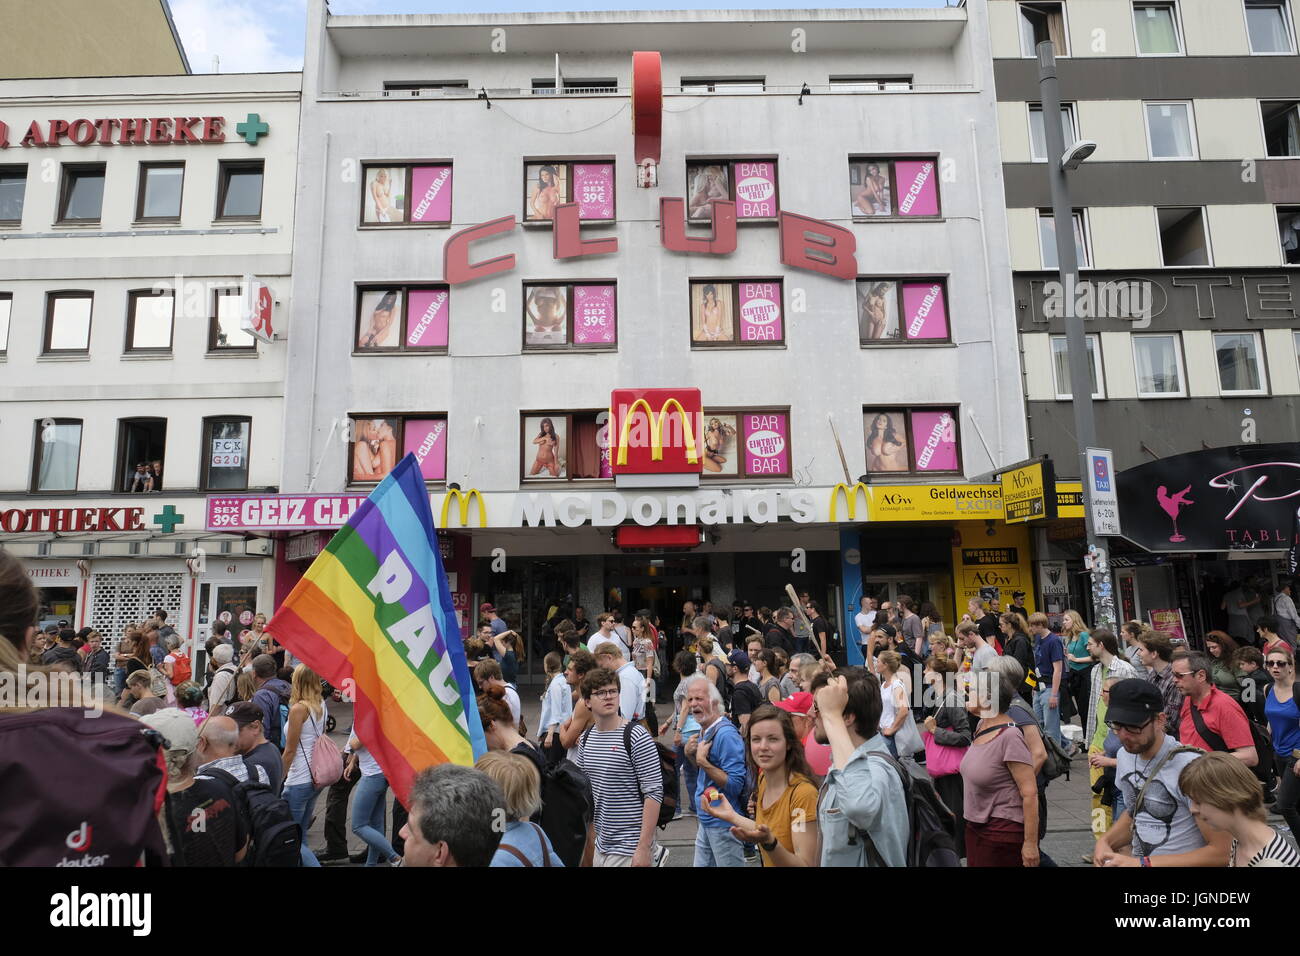 Hamburg, Germany. 08th July, 2017. Large anti G20 demonstration in red-light district Reeperbahn, Hamburg.Large demonstration against G20 by predominantly left wing groups marches through central Hamburg. Credit: Iain Masterton/Alamy Live News Stock Photo